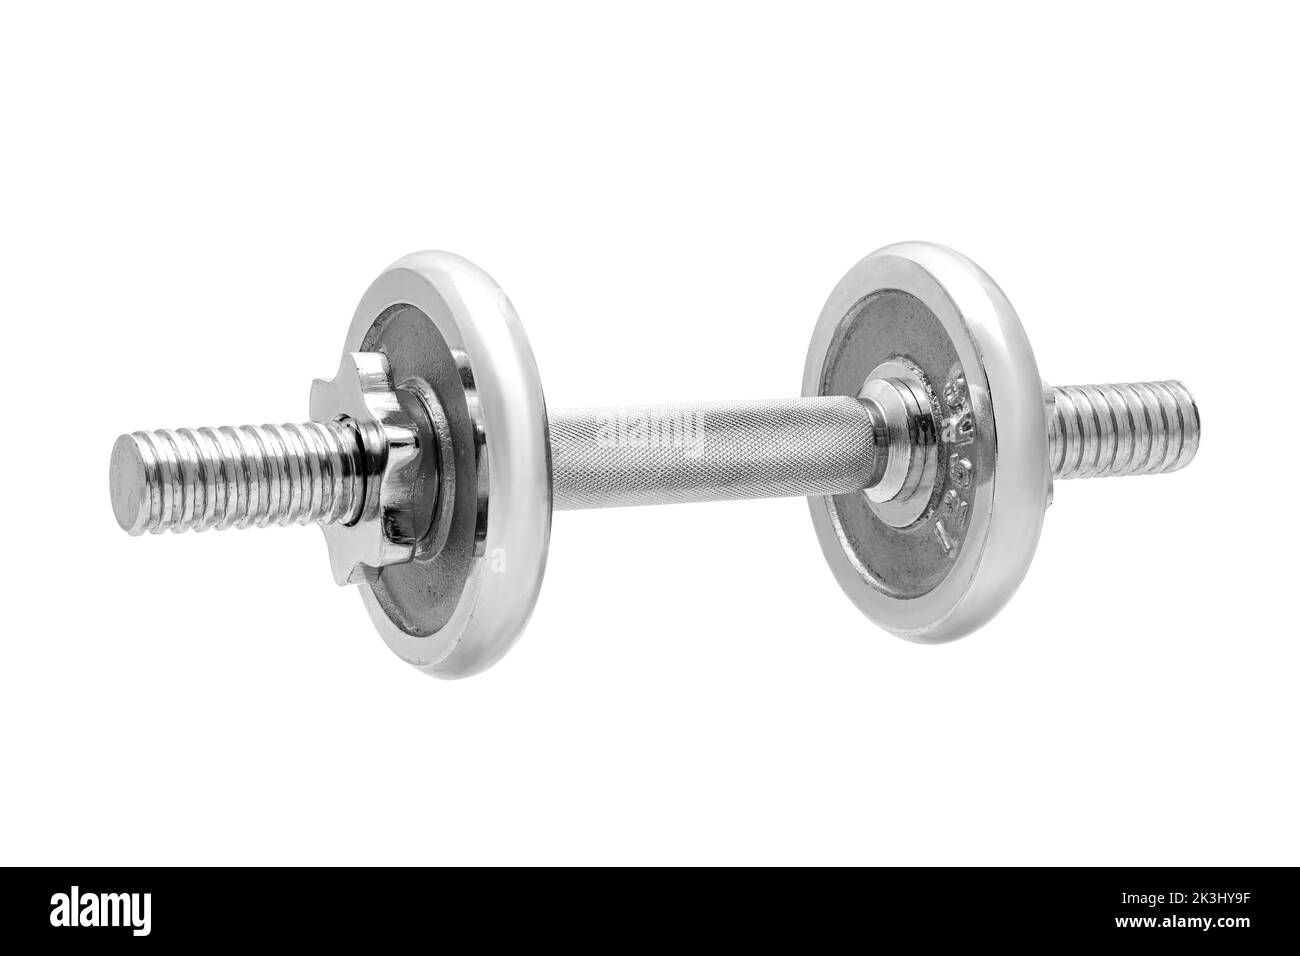 gray adjustable dumbbell from stainless steel with roughened non-slip handle, prefabricated accessory consisting of threaded rod and extra weight panc Stock Photo